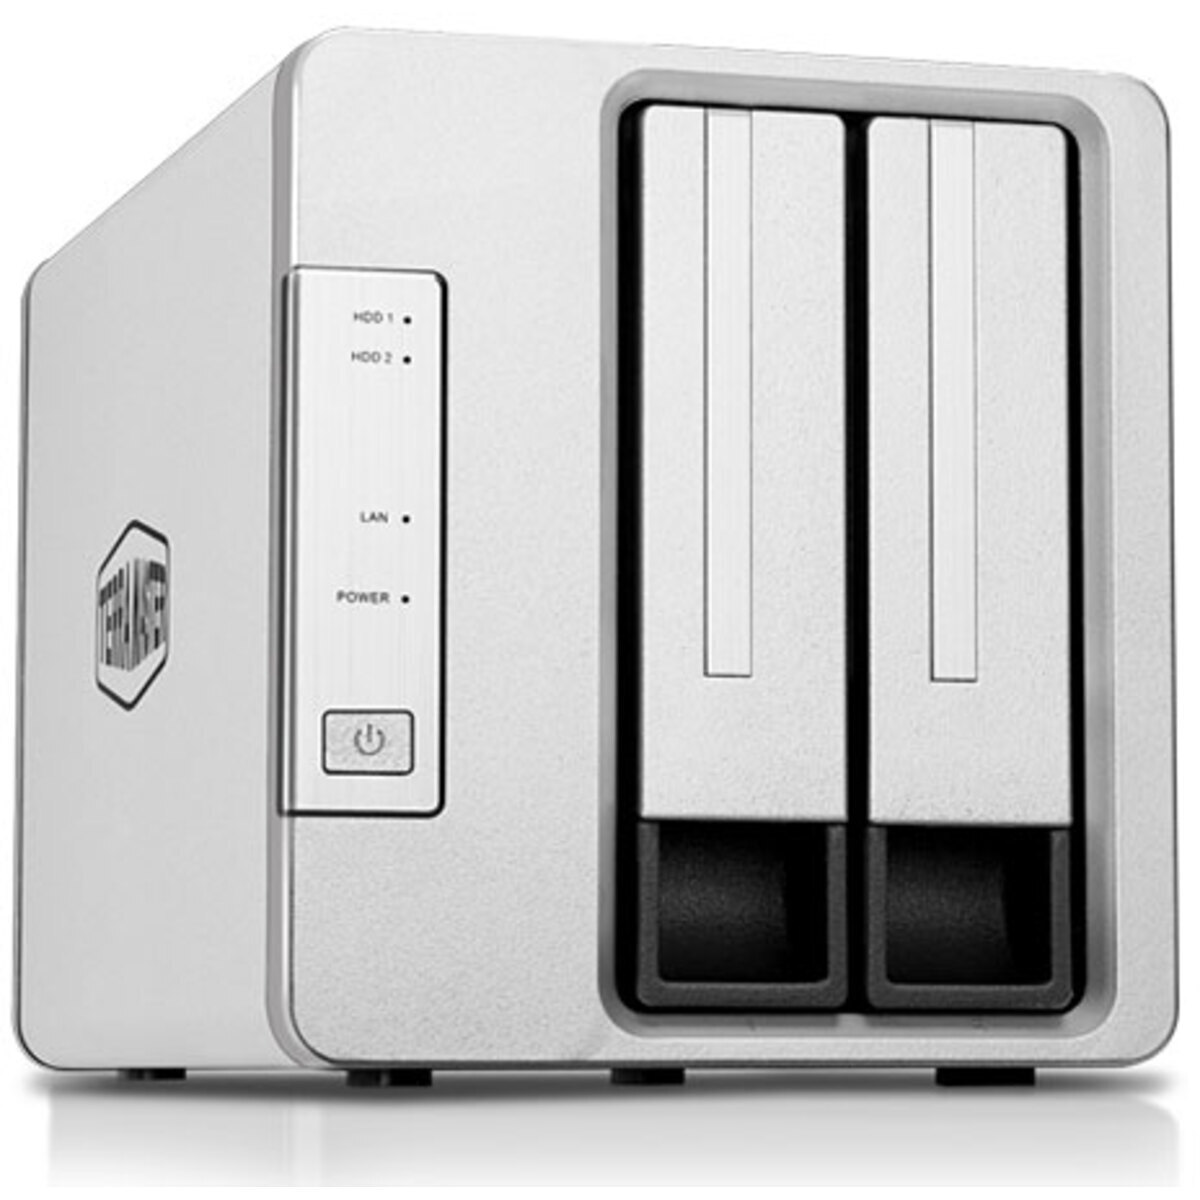 TerraMaster F2-223 12tb 2-Bay Desktop Personal / Basic Home / Small Office NAS - Network Attached Storage Device 2x6tb Seagate IronWolf Pro ST6000NT001 3.5 7200rpm SATA 6Gb/s HDD NAS Class Drives Installed - Burn-In Tested - FREE RAM UPGRADE F2-223